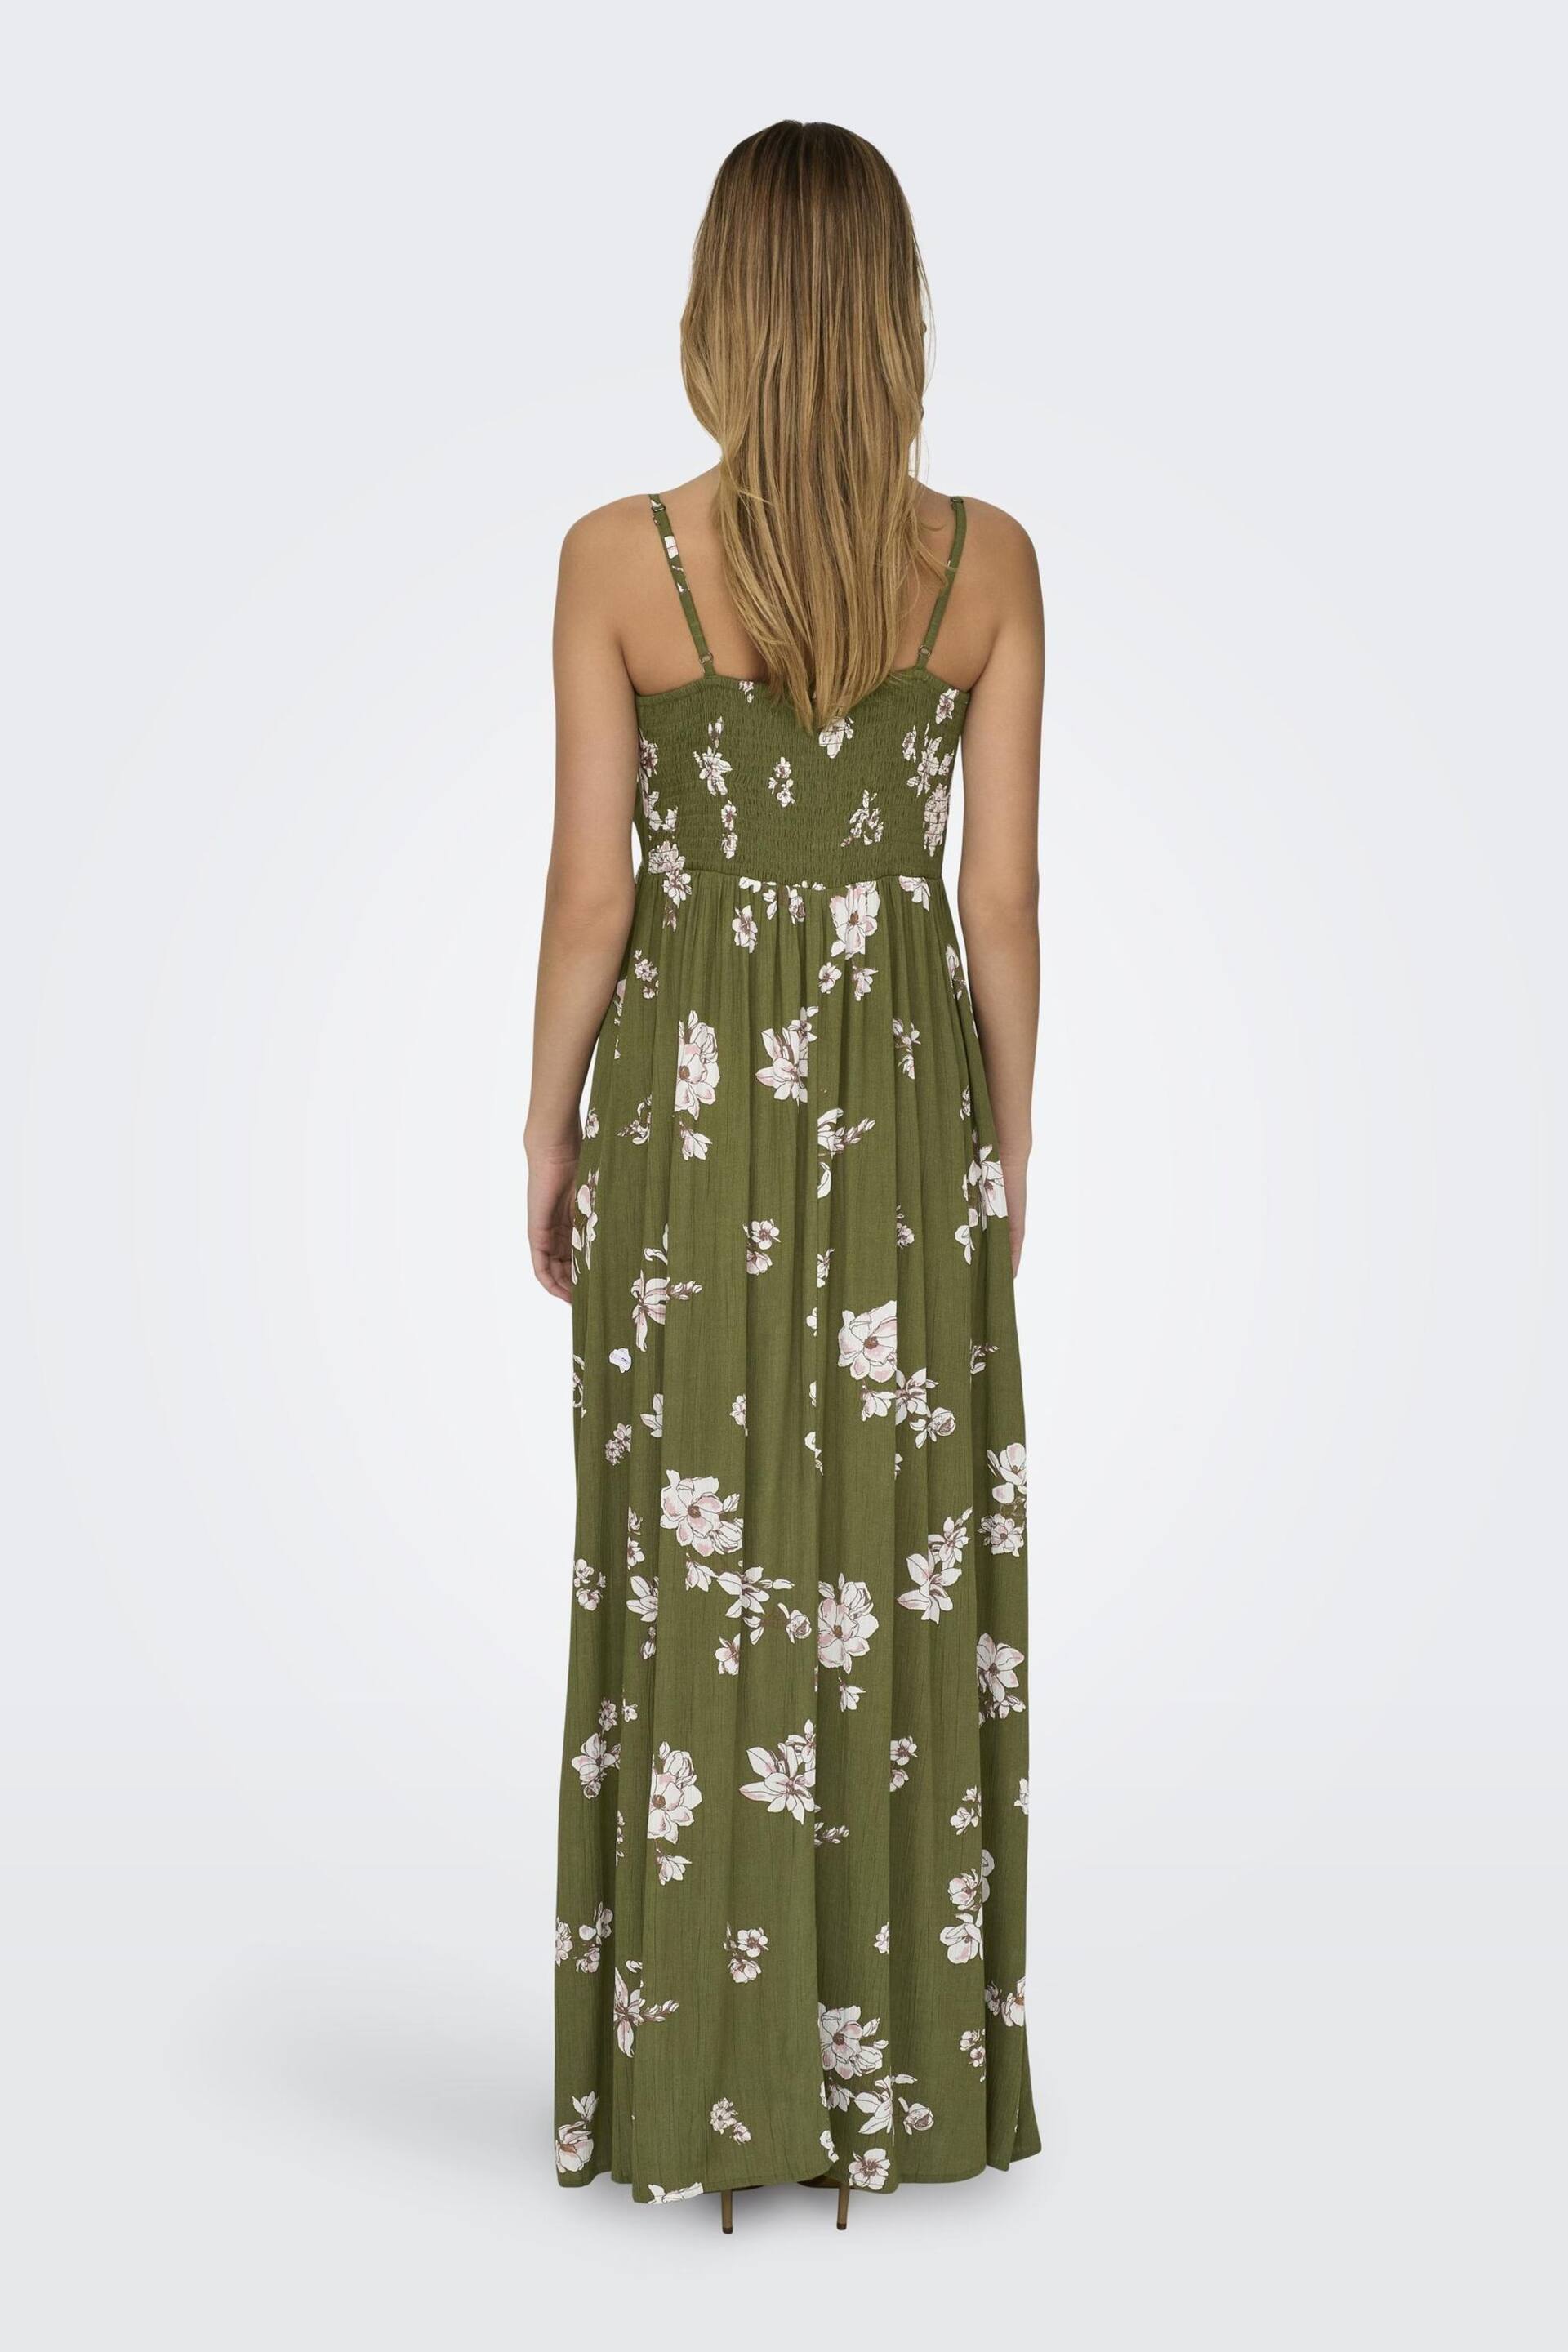 JDY Green Floral Print Cheesecloth Cami Maxi Summer Dress - Image 4 of 4